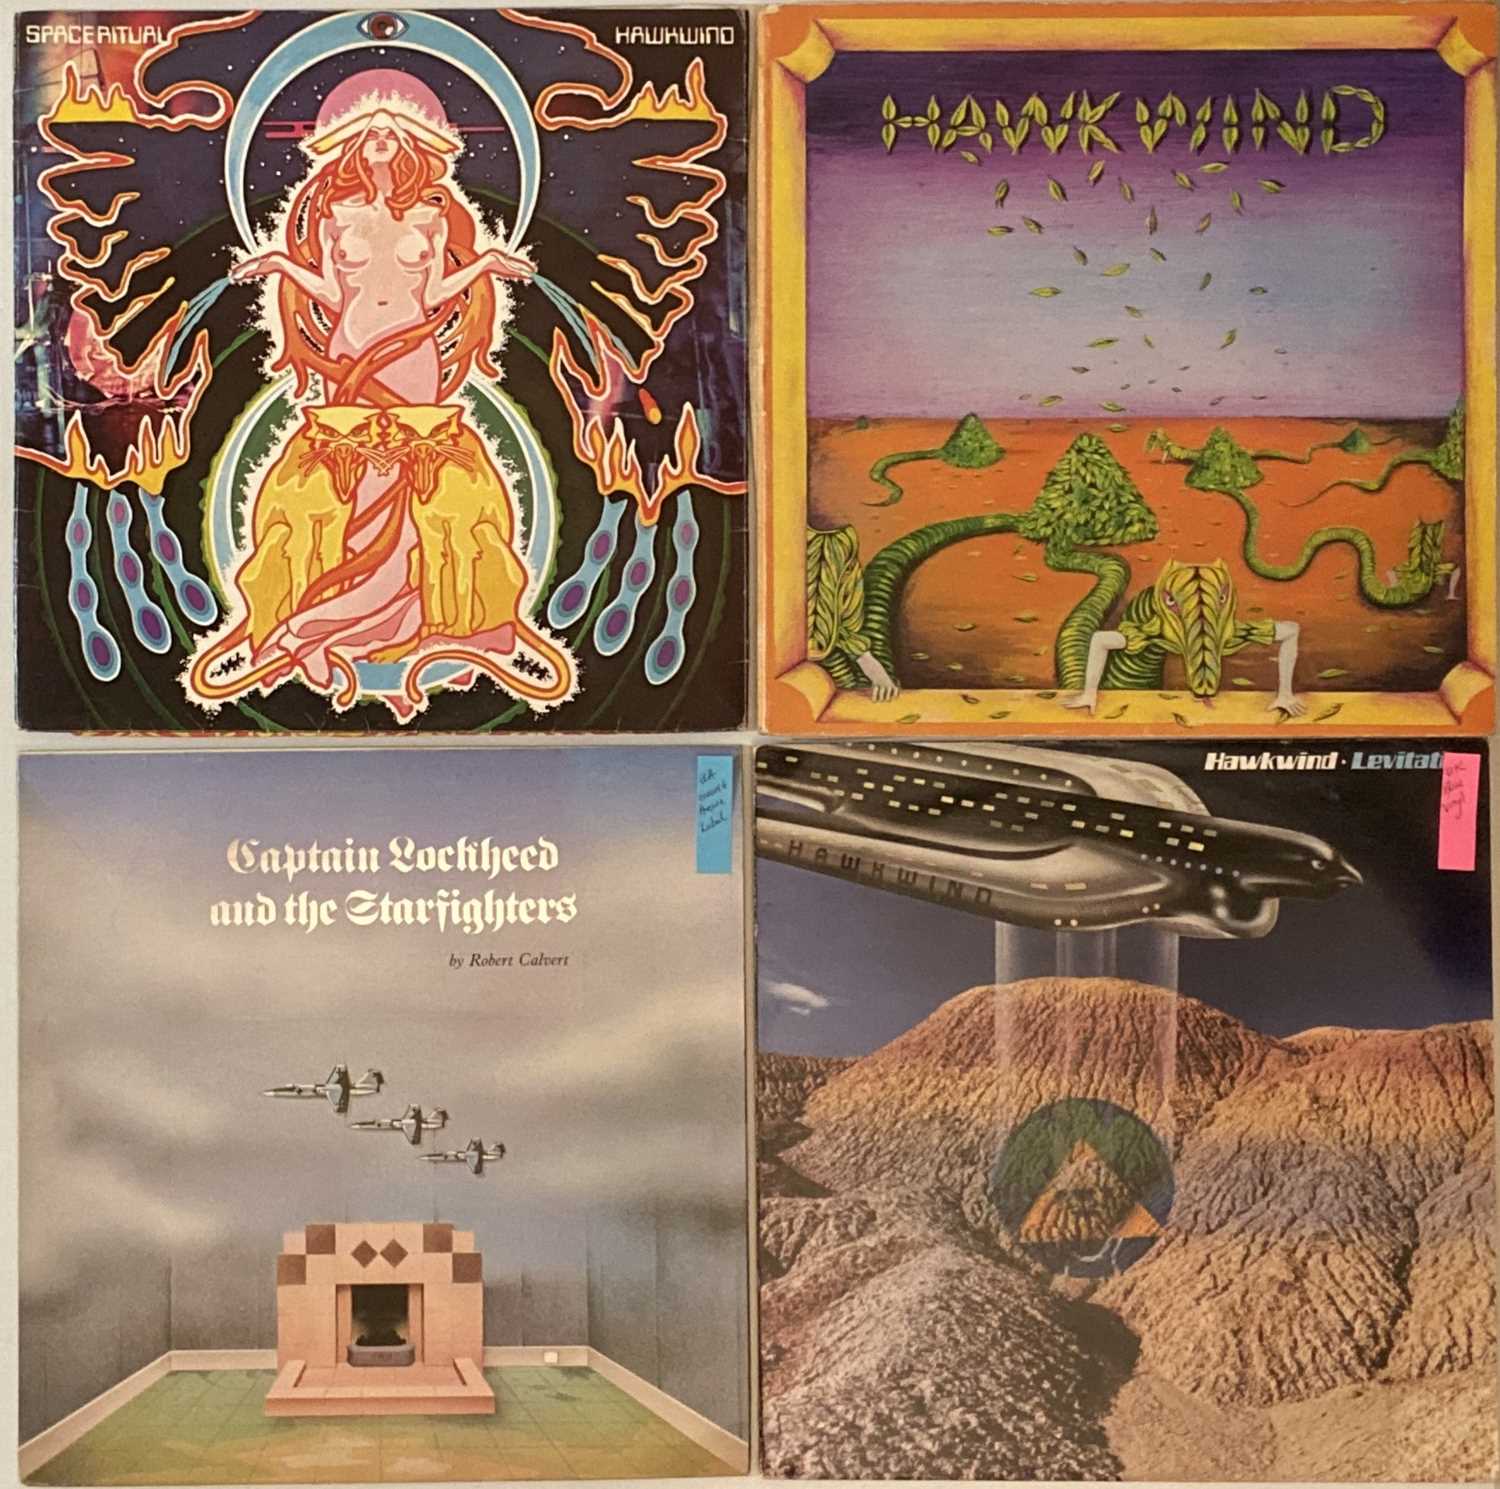 Lot 1215 - Hawkwind and Related  - LP Rarities